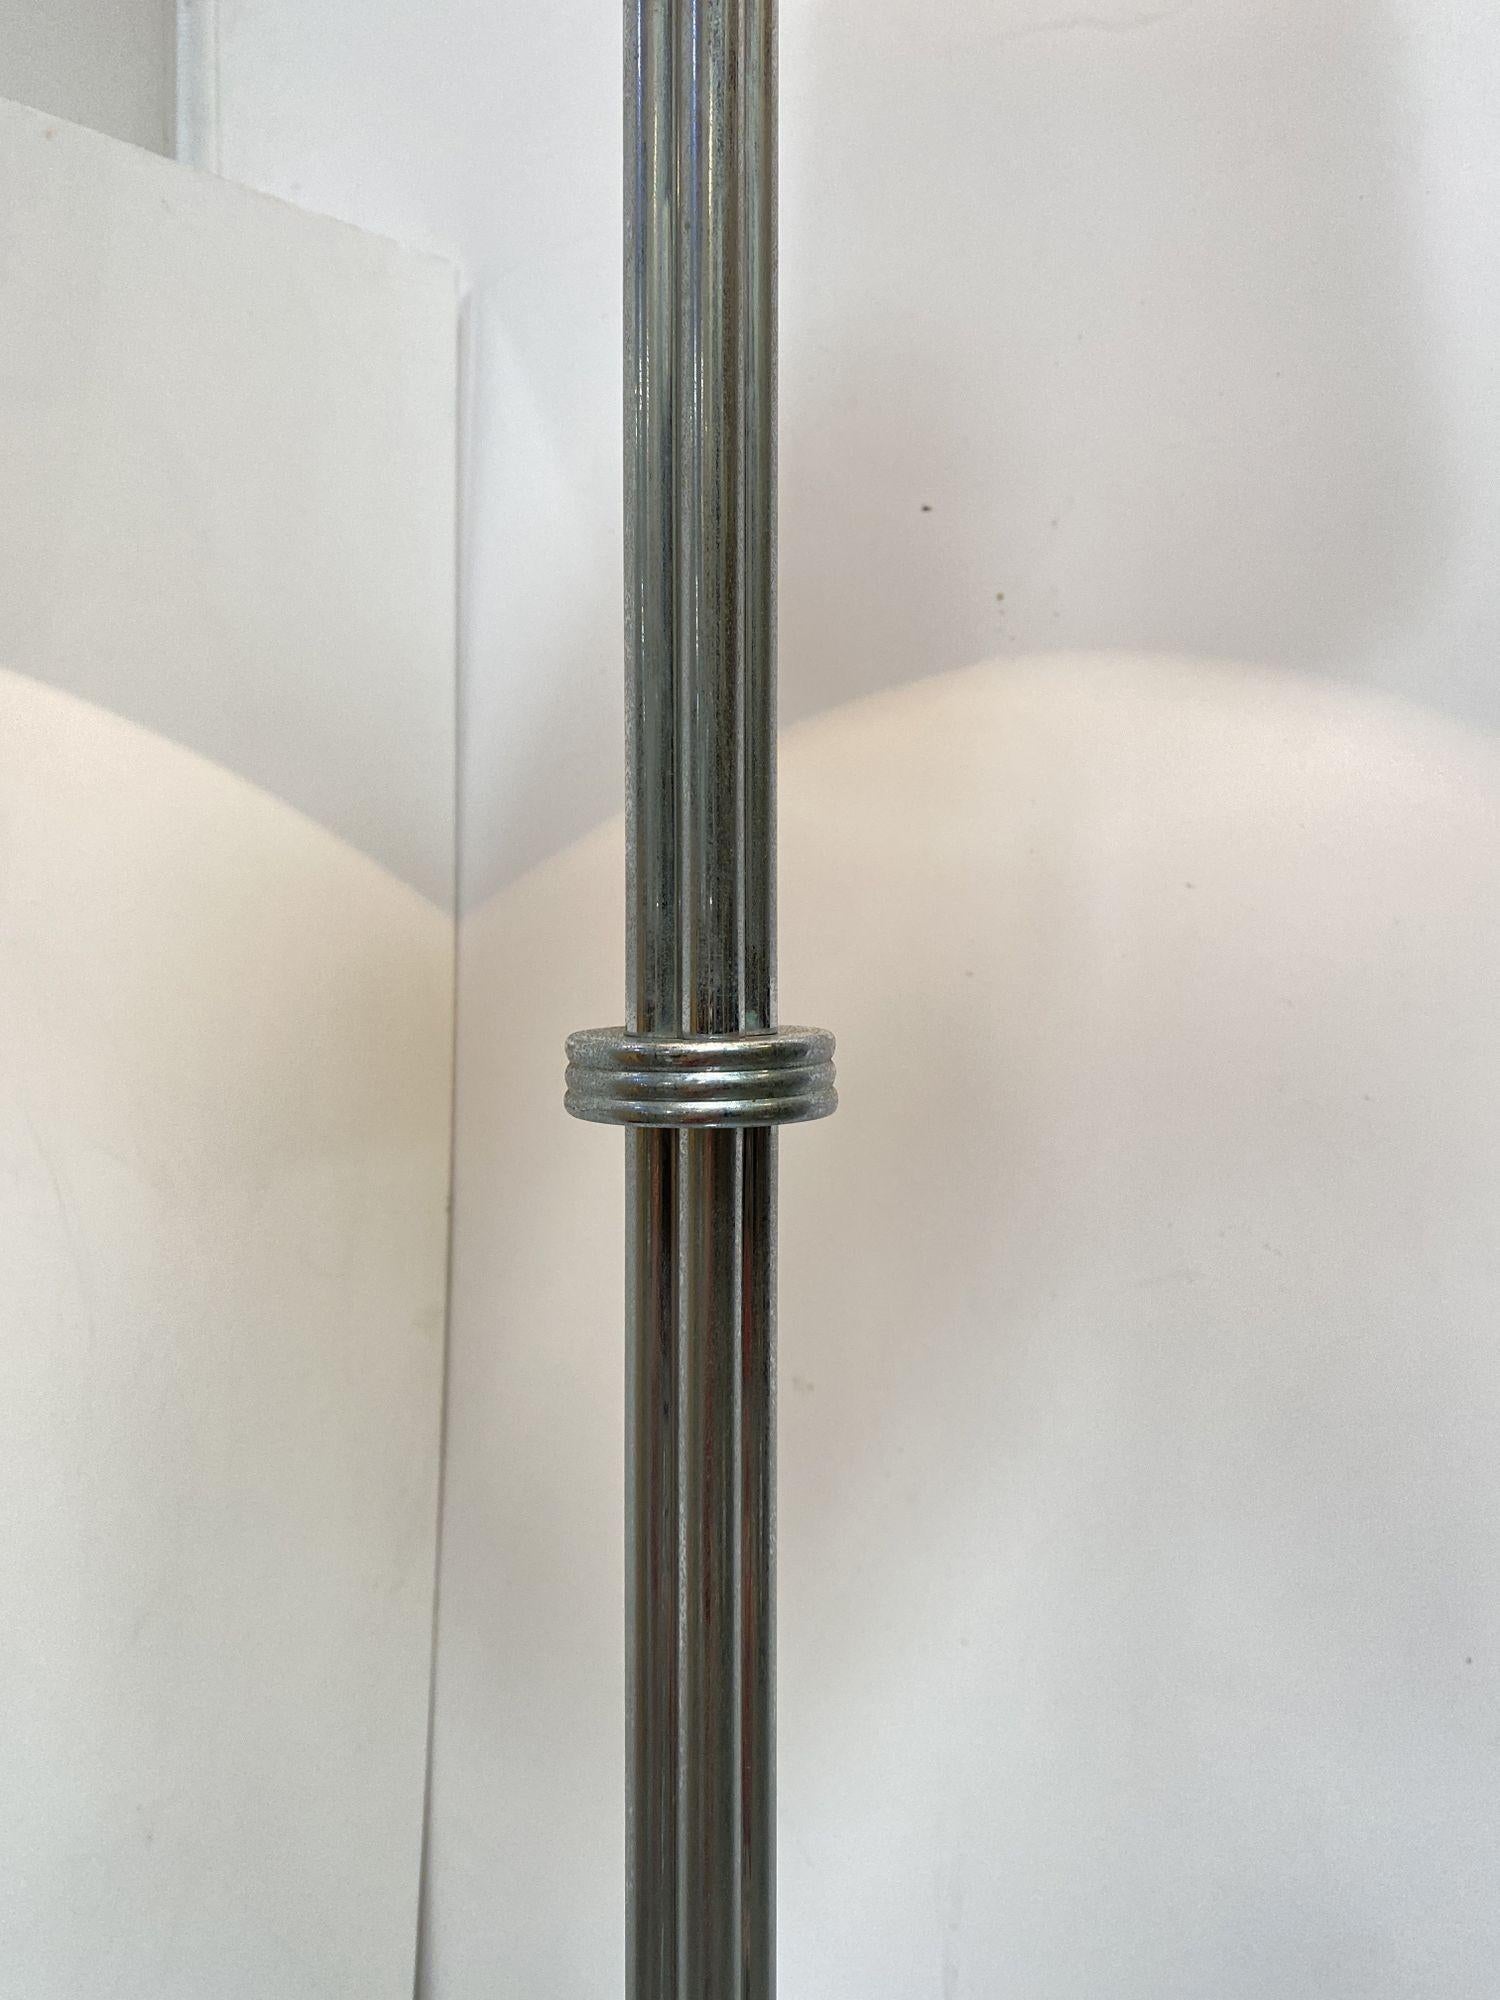 Mid-Century Modern chrome polish floor lamp made of 4 connecting rods flowing to ring base.